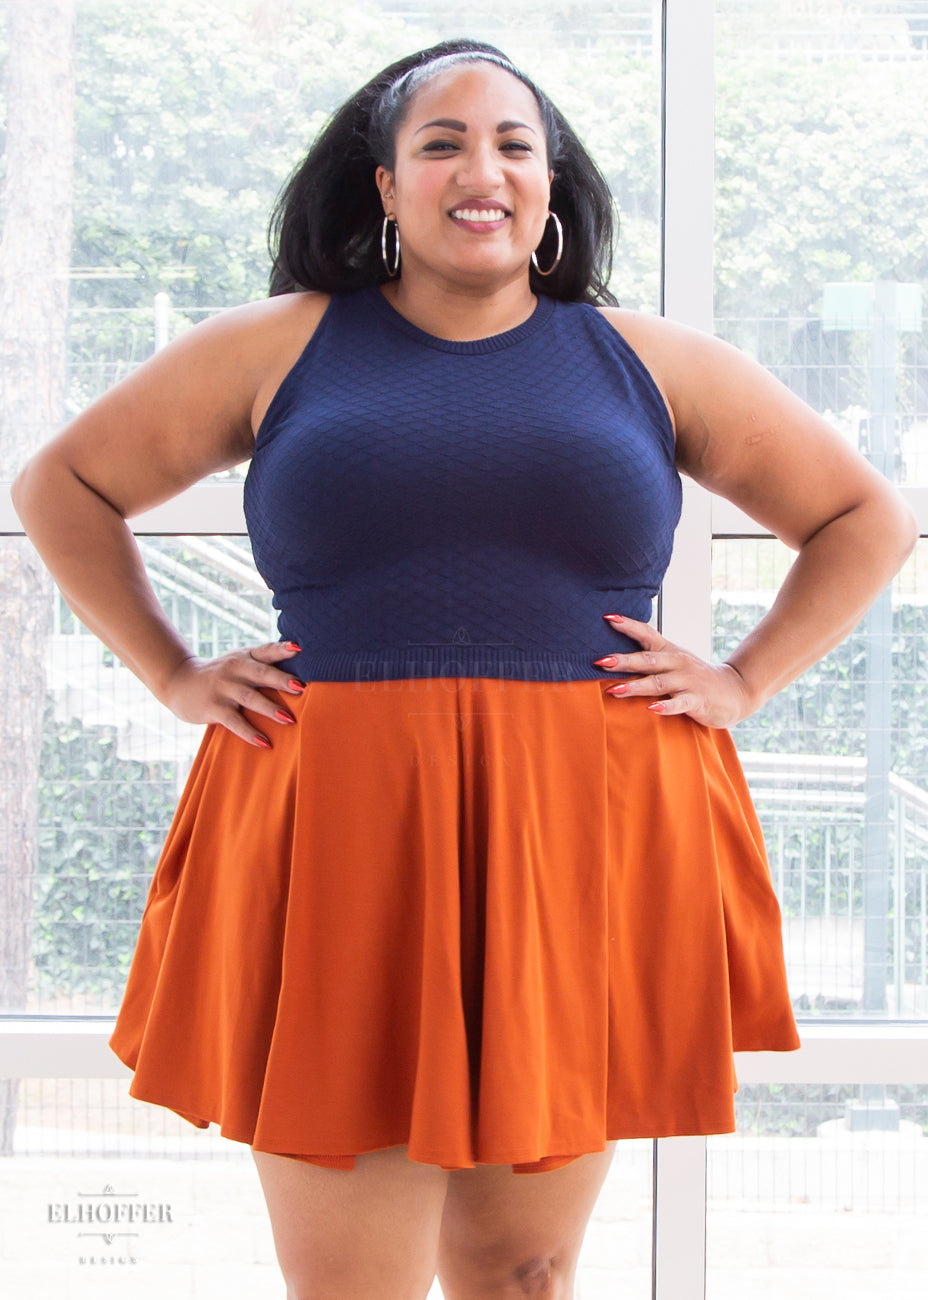 Tas is modeling the size 2XL skirt. She has a 51” Bust, 39.5” Waist, 52” Hips, and is 5’6”.